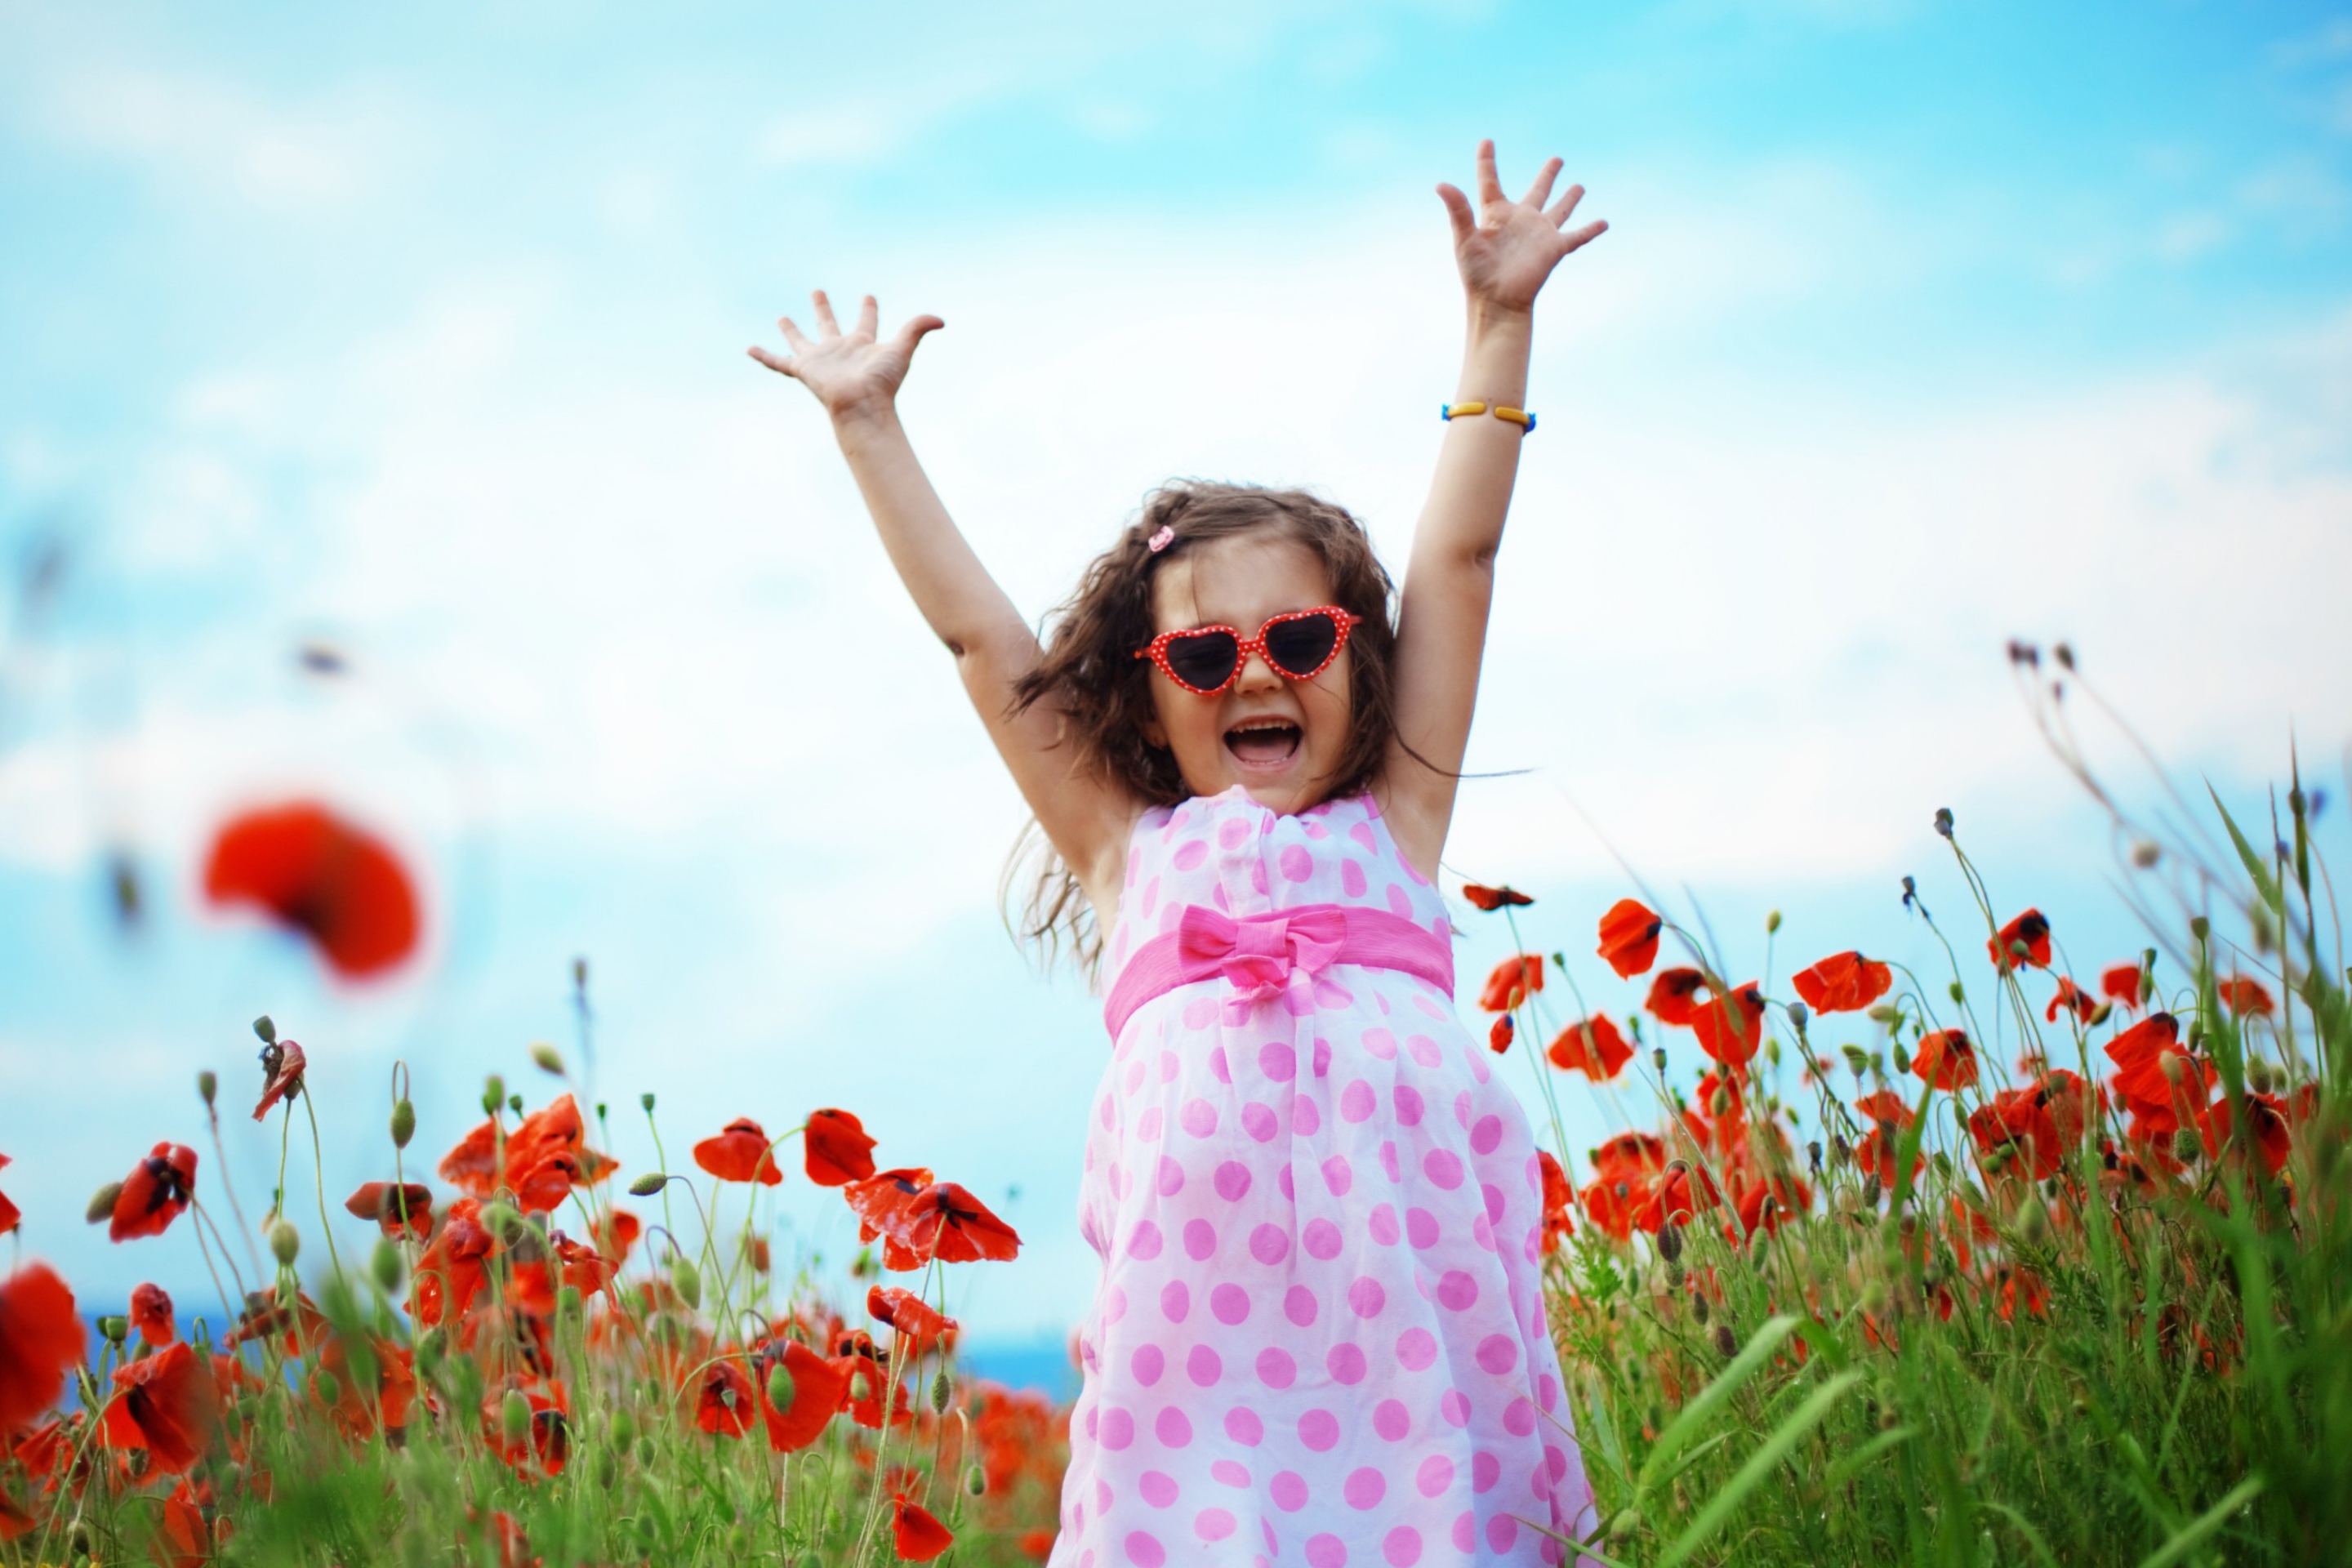 Happy Little Girl In Love With Life wallpaper 2880x1920